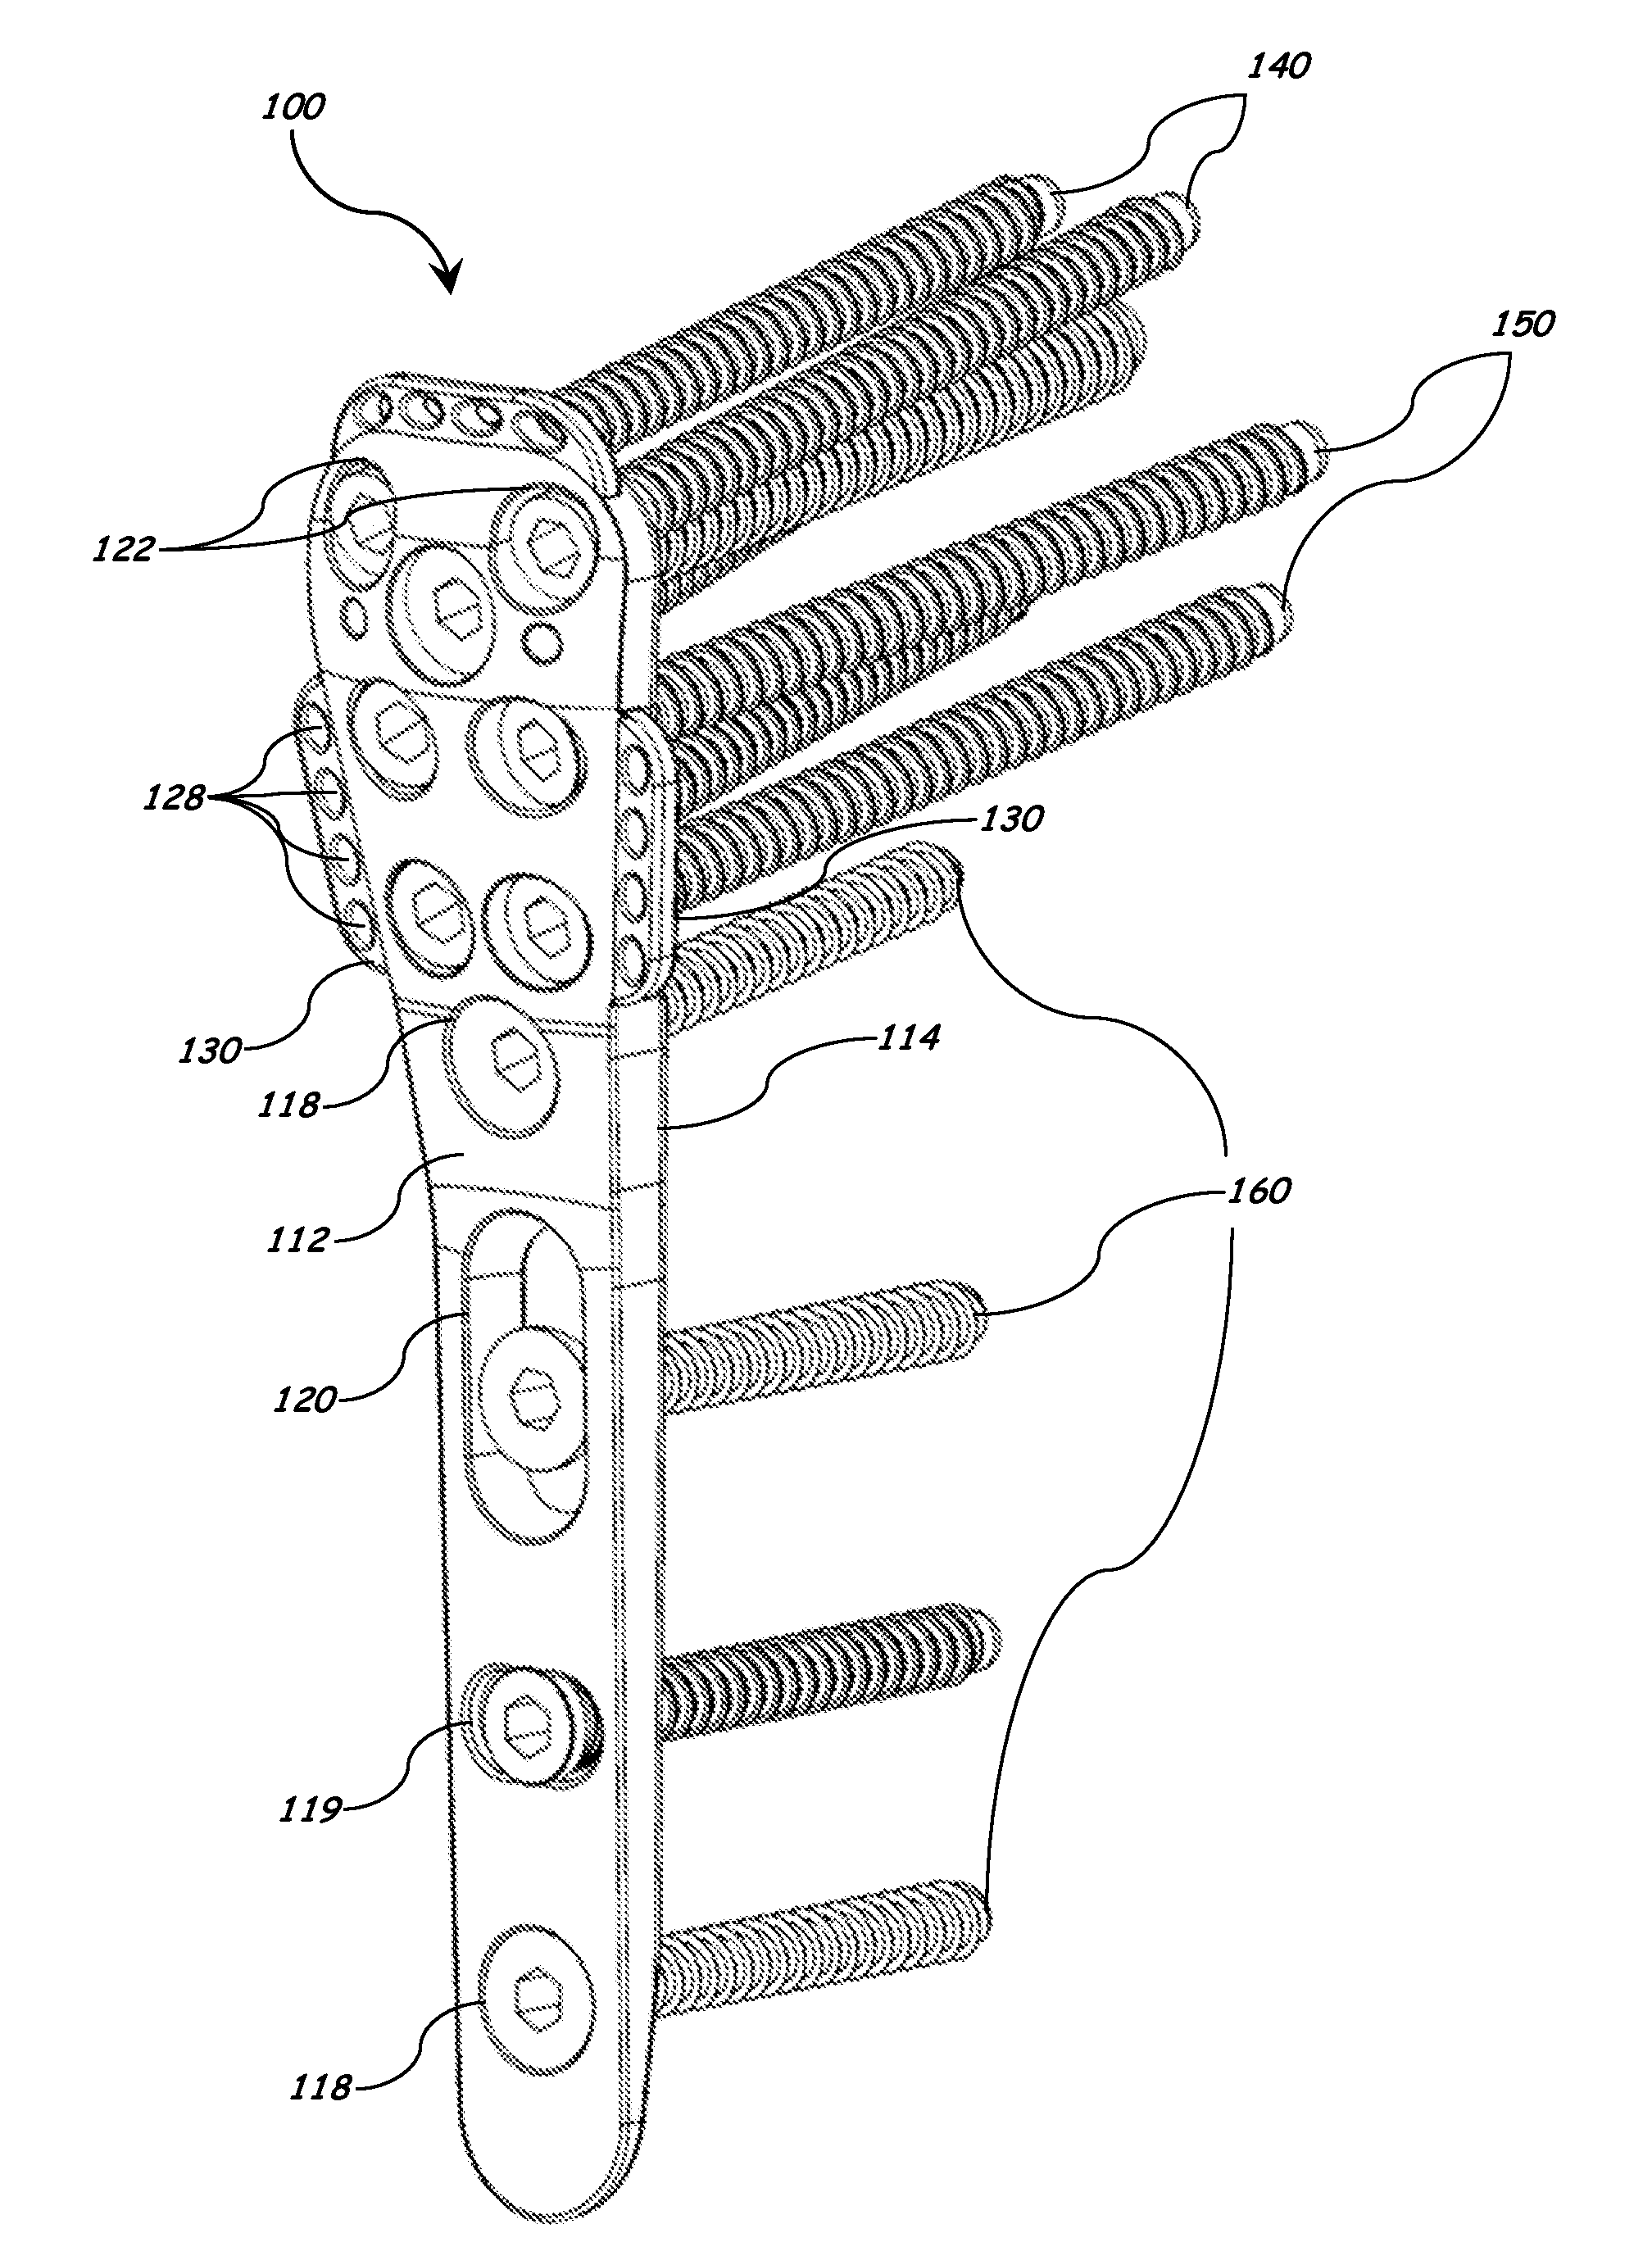 Bone plate with elevated suture hole structures